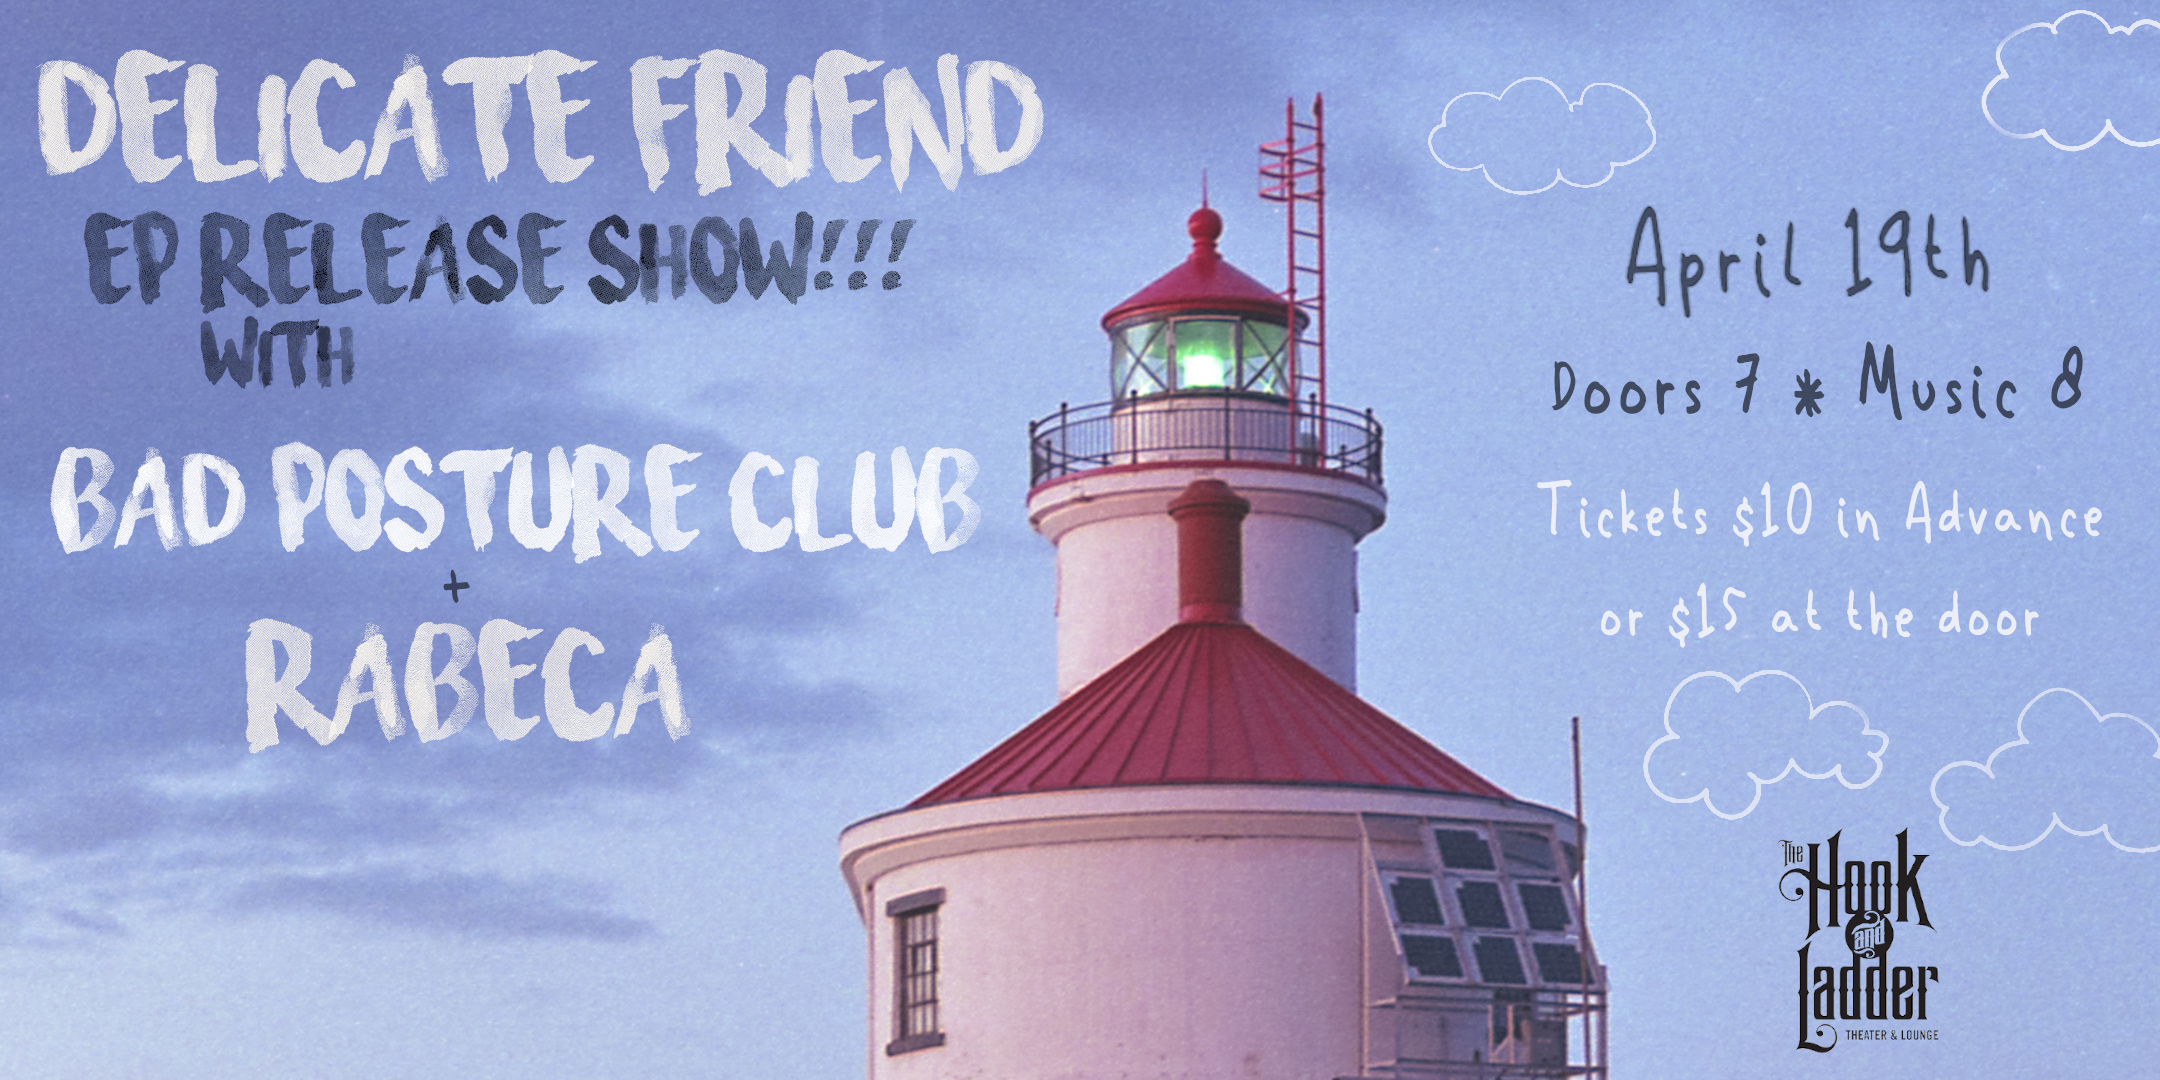 Delicate Friend EP Release with Bad Posture Club and Rabeca Wednesday April 19 The Mission Room at The Hook nd Ladder Theater Doors 7:00pm :: Music 8:00pm :: 21+ General Admission * $10 ADV / $15 DOS * Does not include fees NO REFUNDS